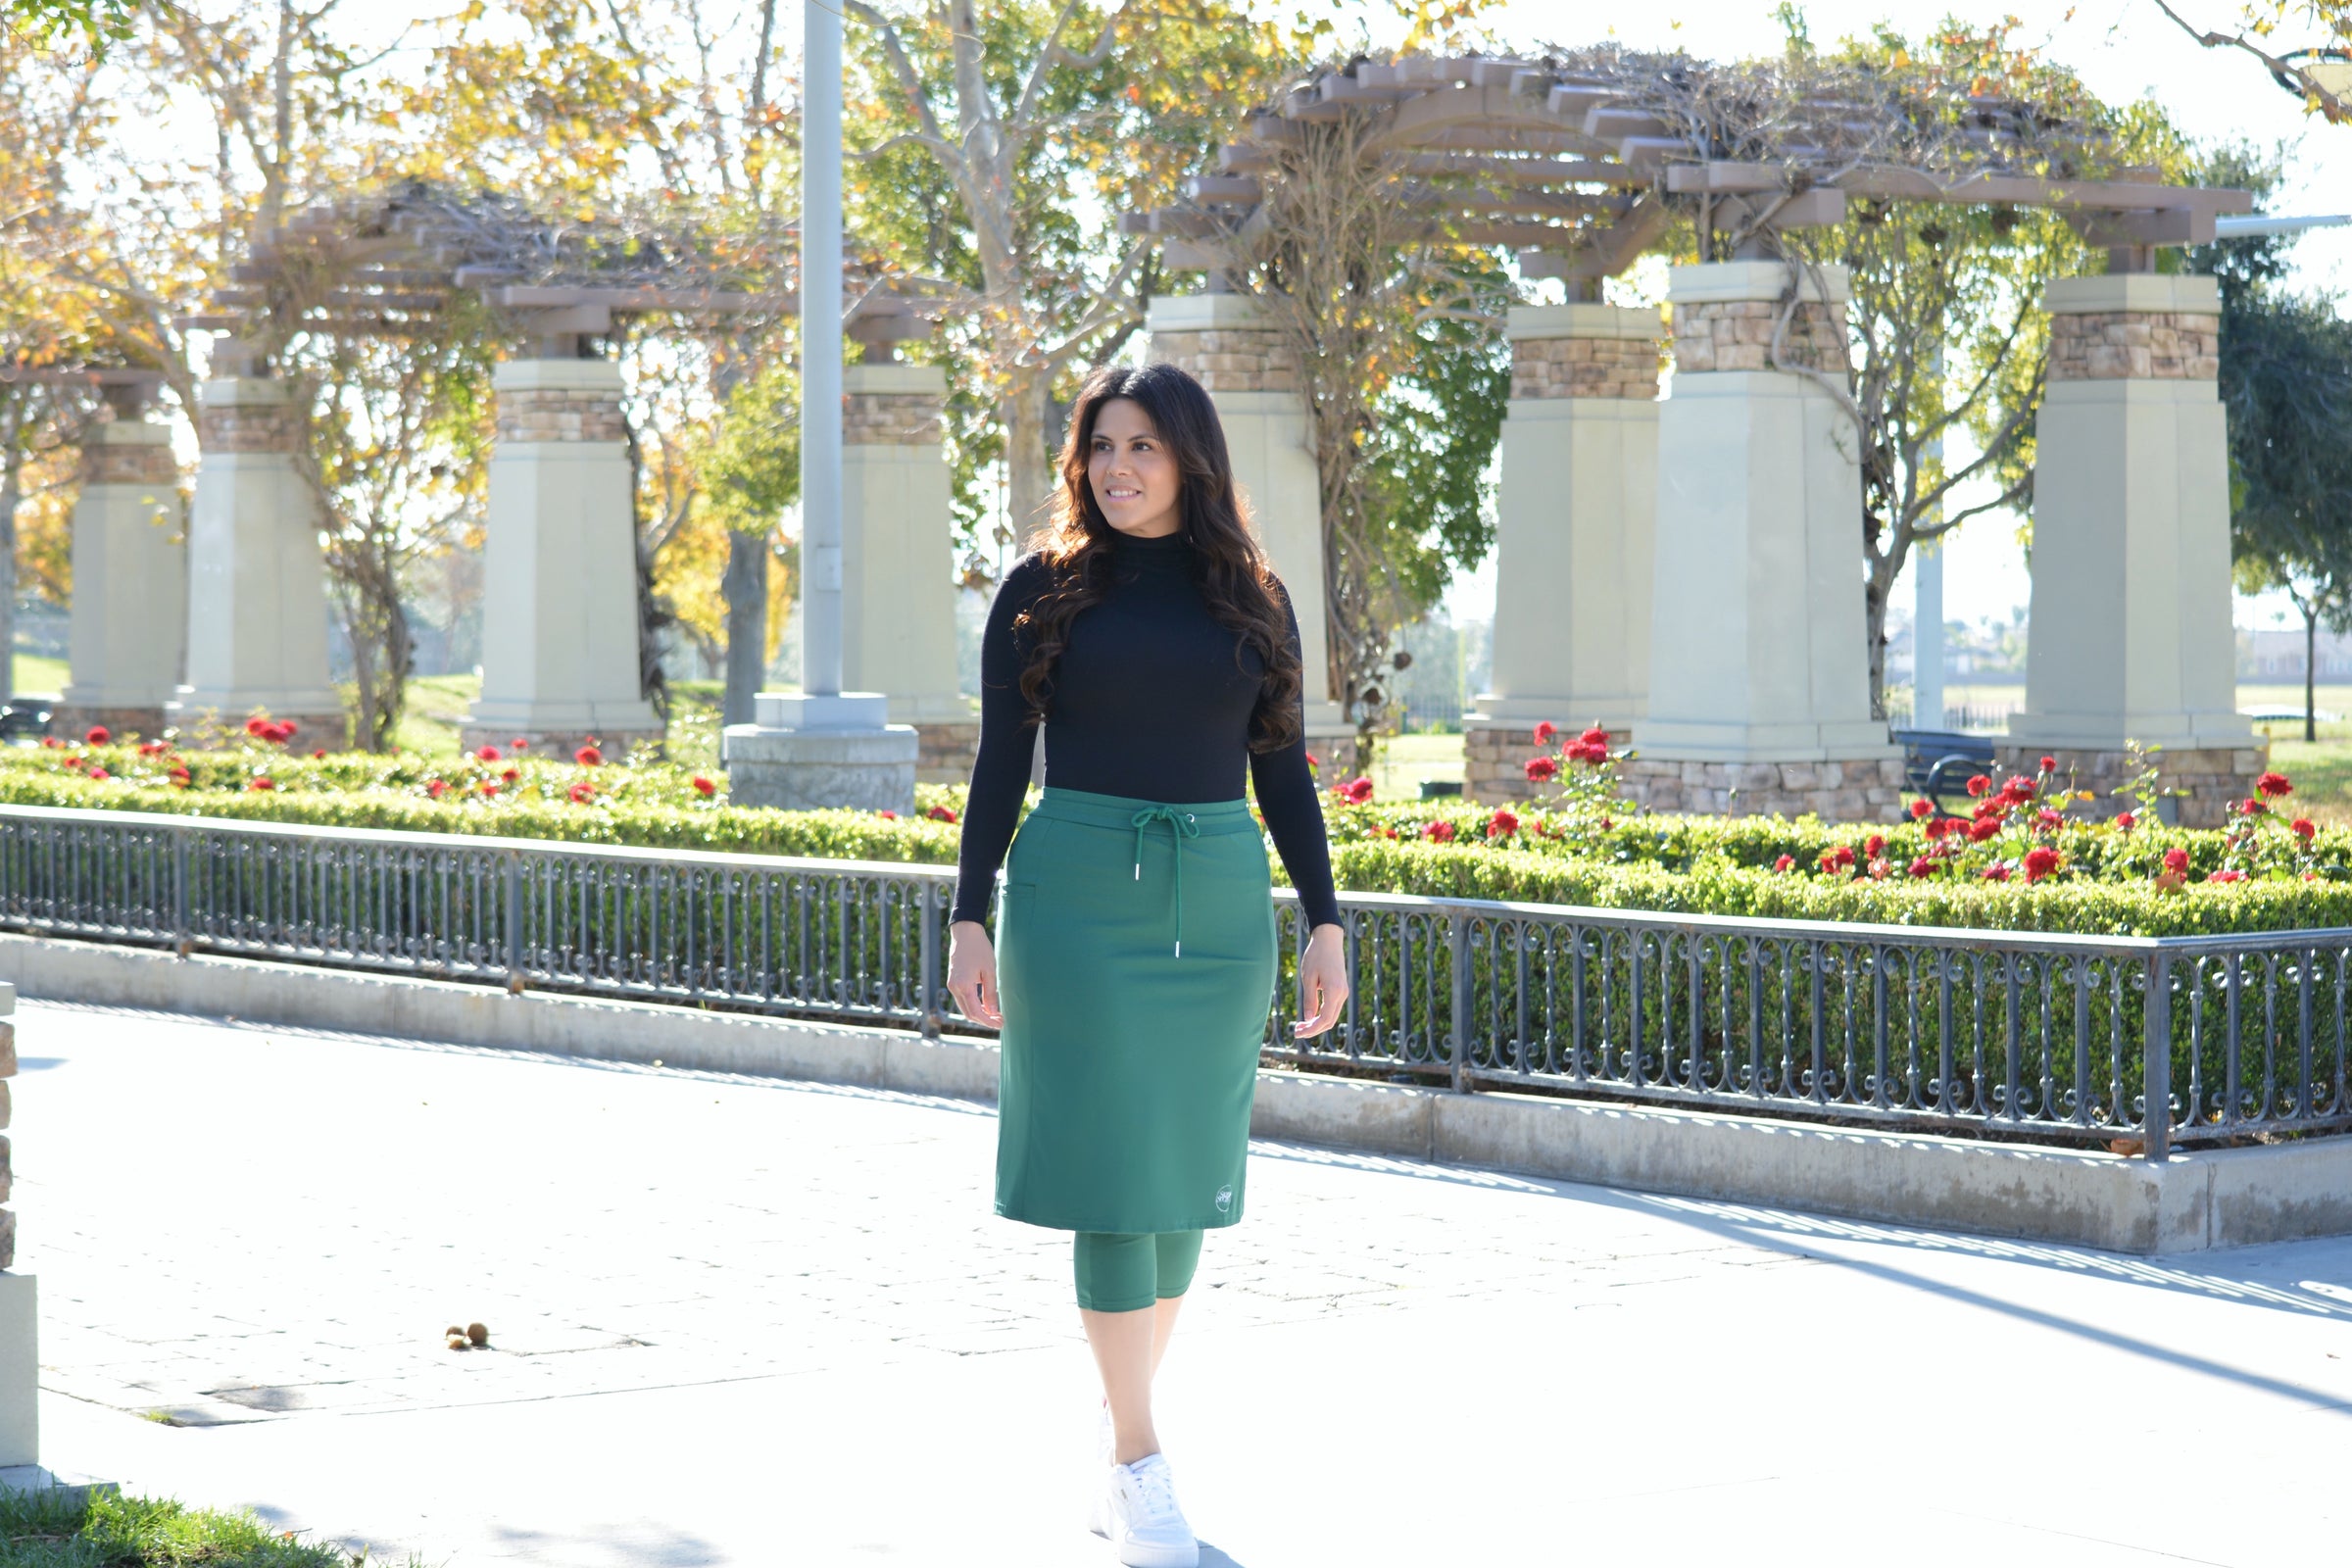 Modest Clothing for Women, Athletic Skirts